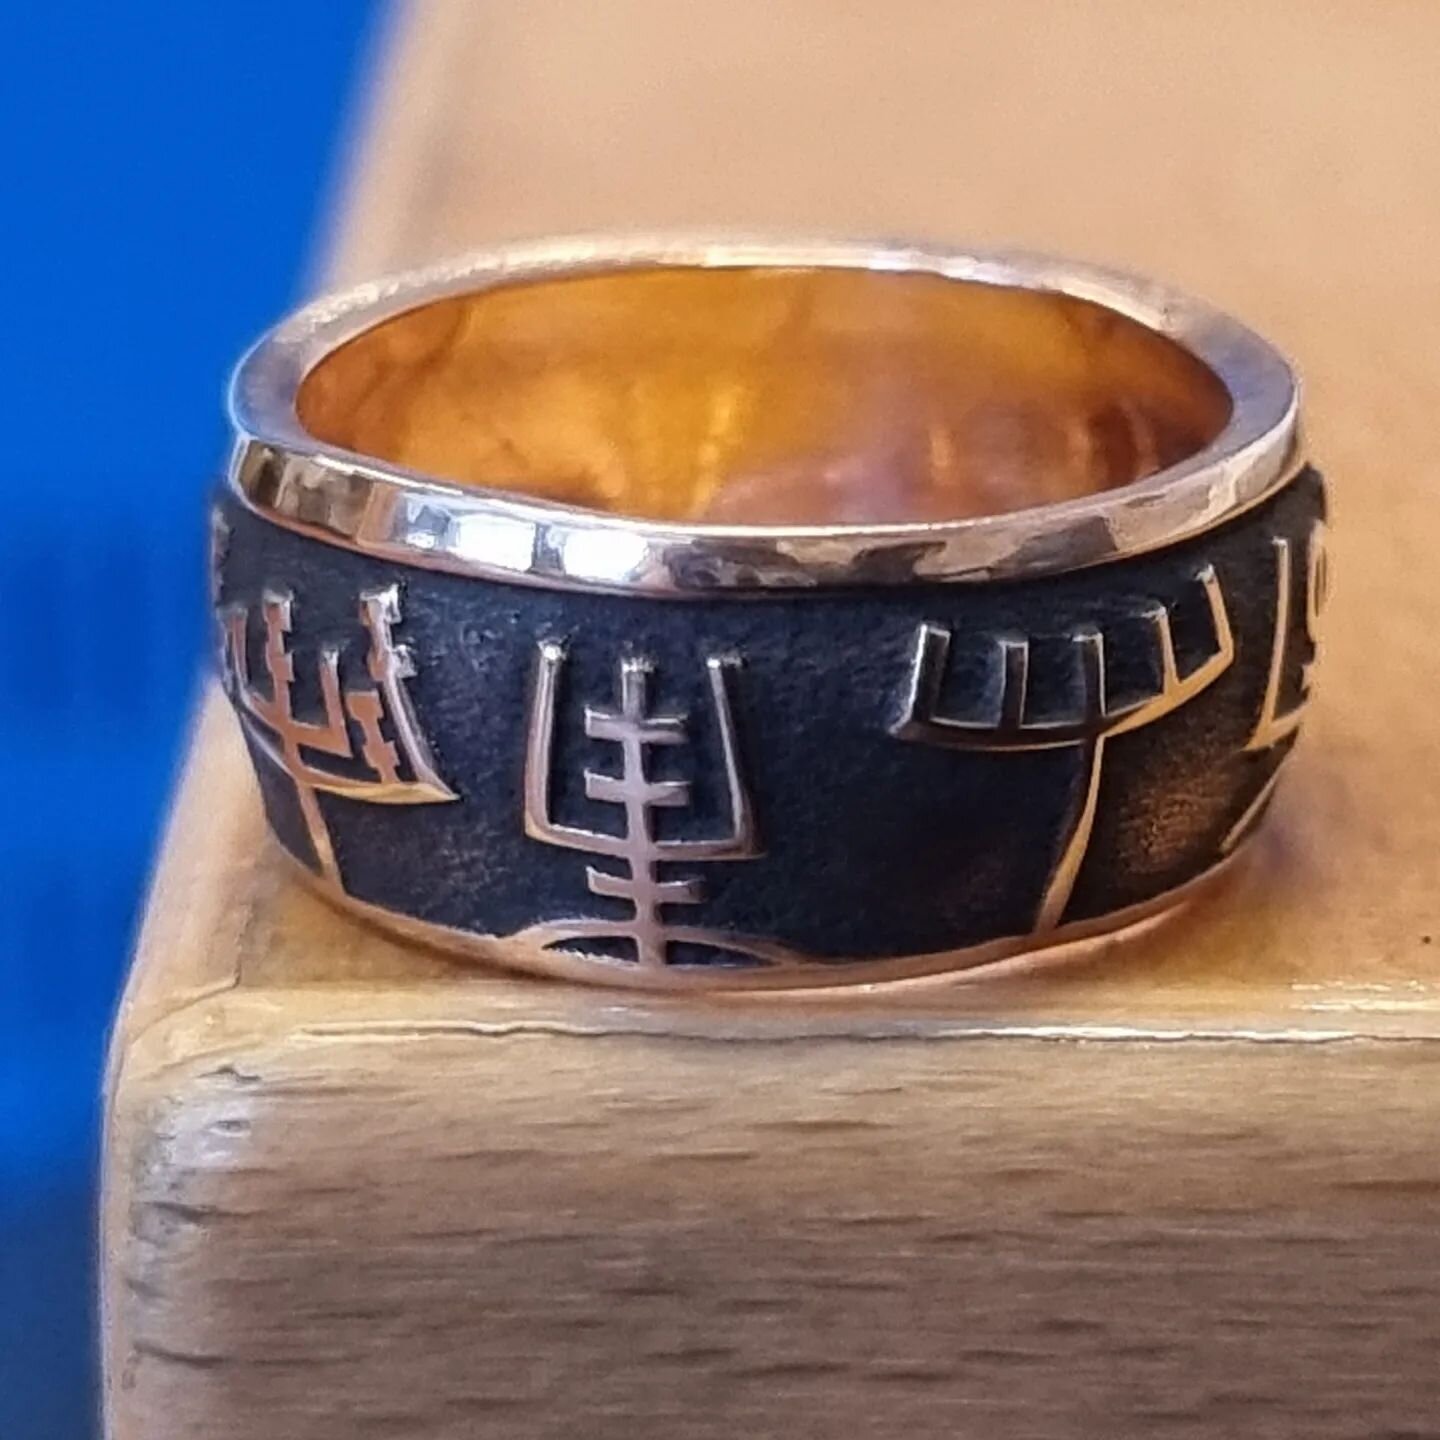 Vegvisir ring made from an old copper coin from Norway
#coinring #vegvisir #dalk #custom